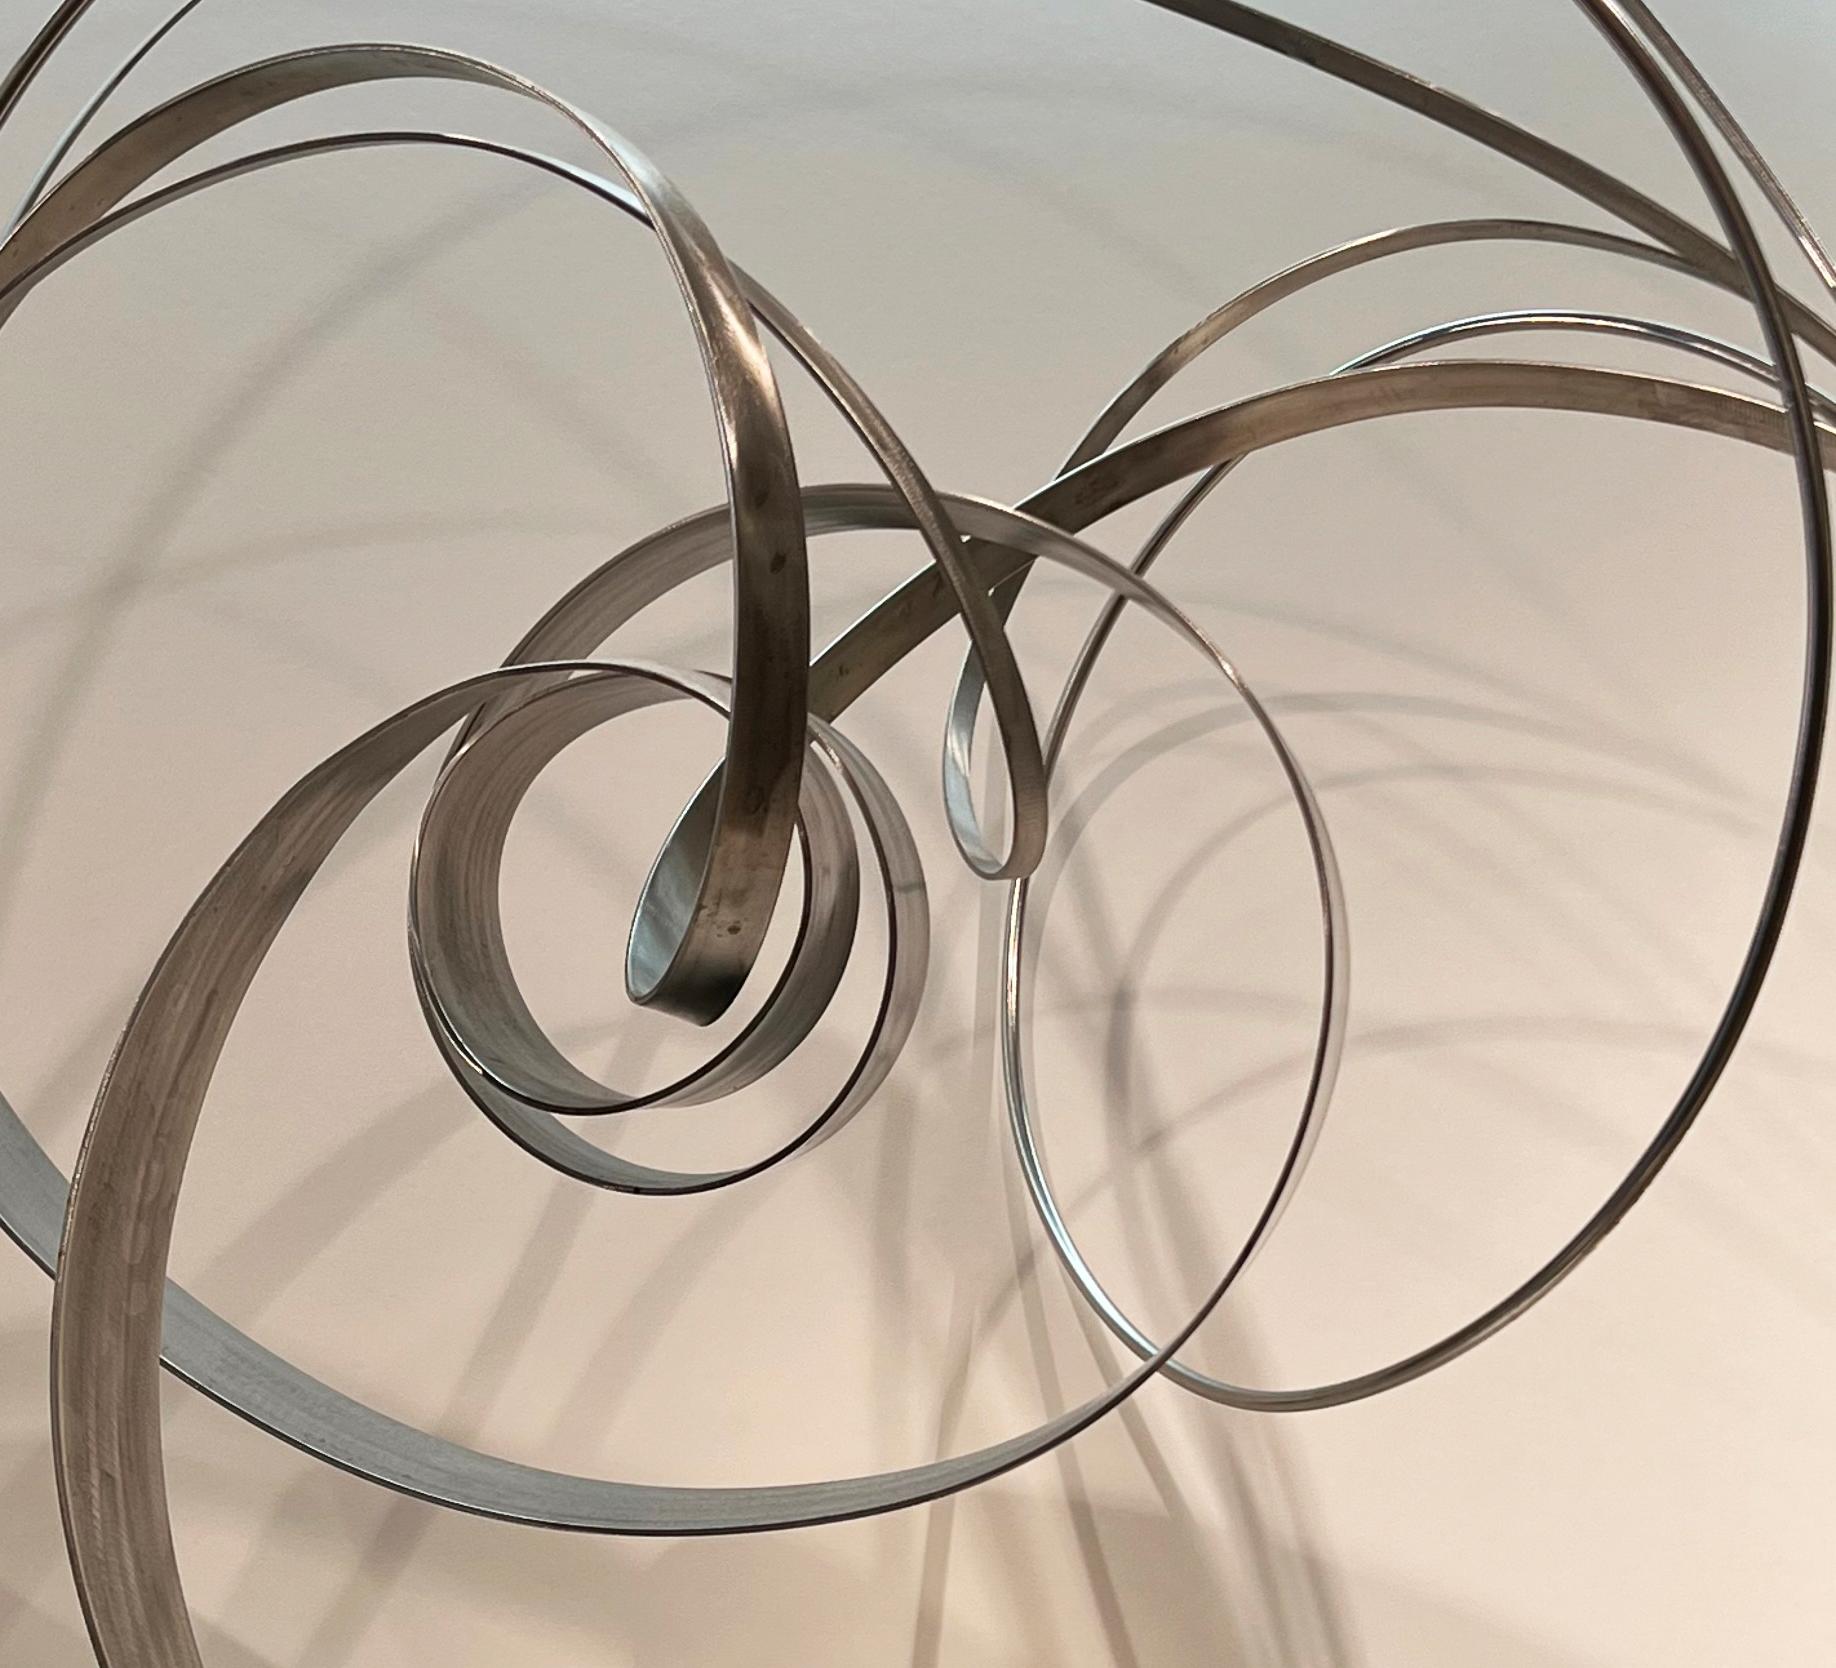 Regroup, large stainless steel and stone spiral abstract sculpture, 2021 - Sculpture by Richard Sturgeon